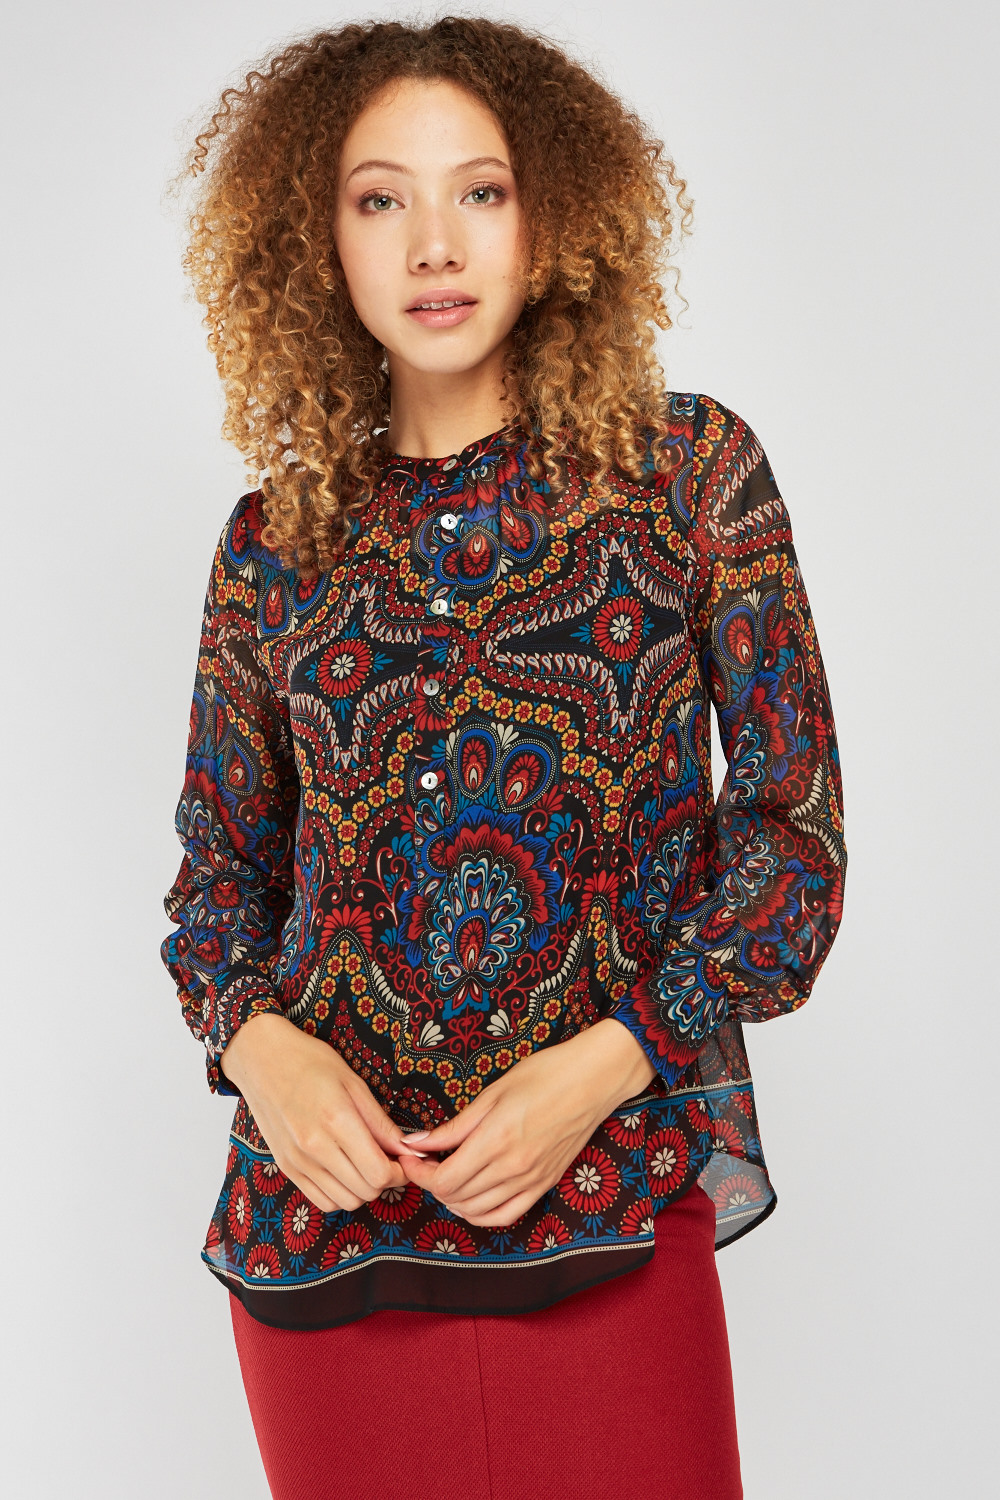 Ethnic Print Sheer Blouse - Just $6